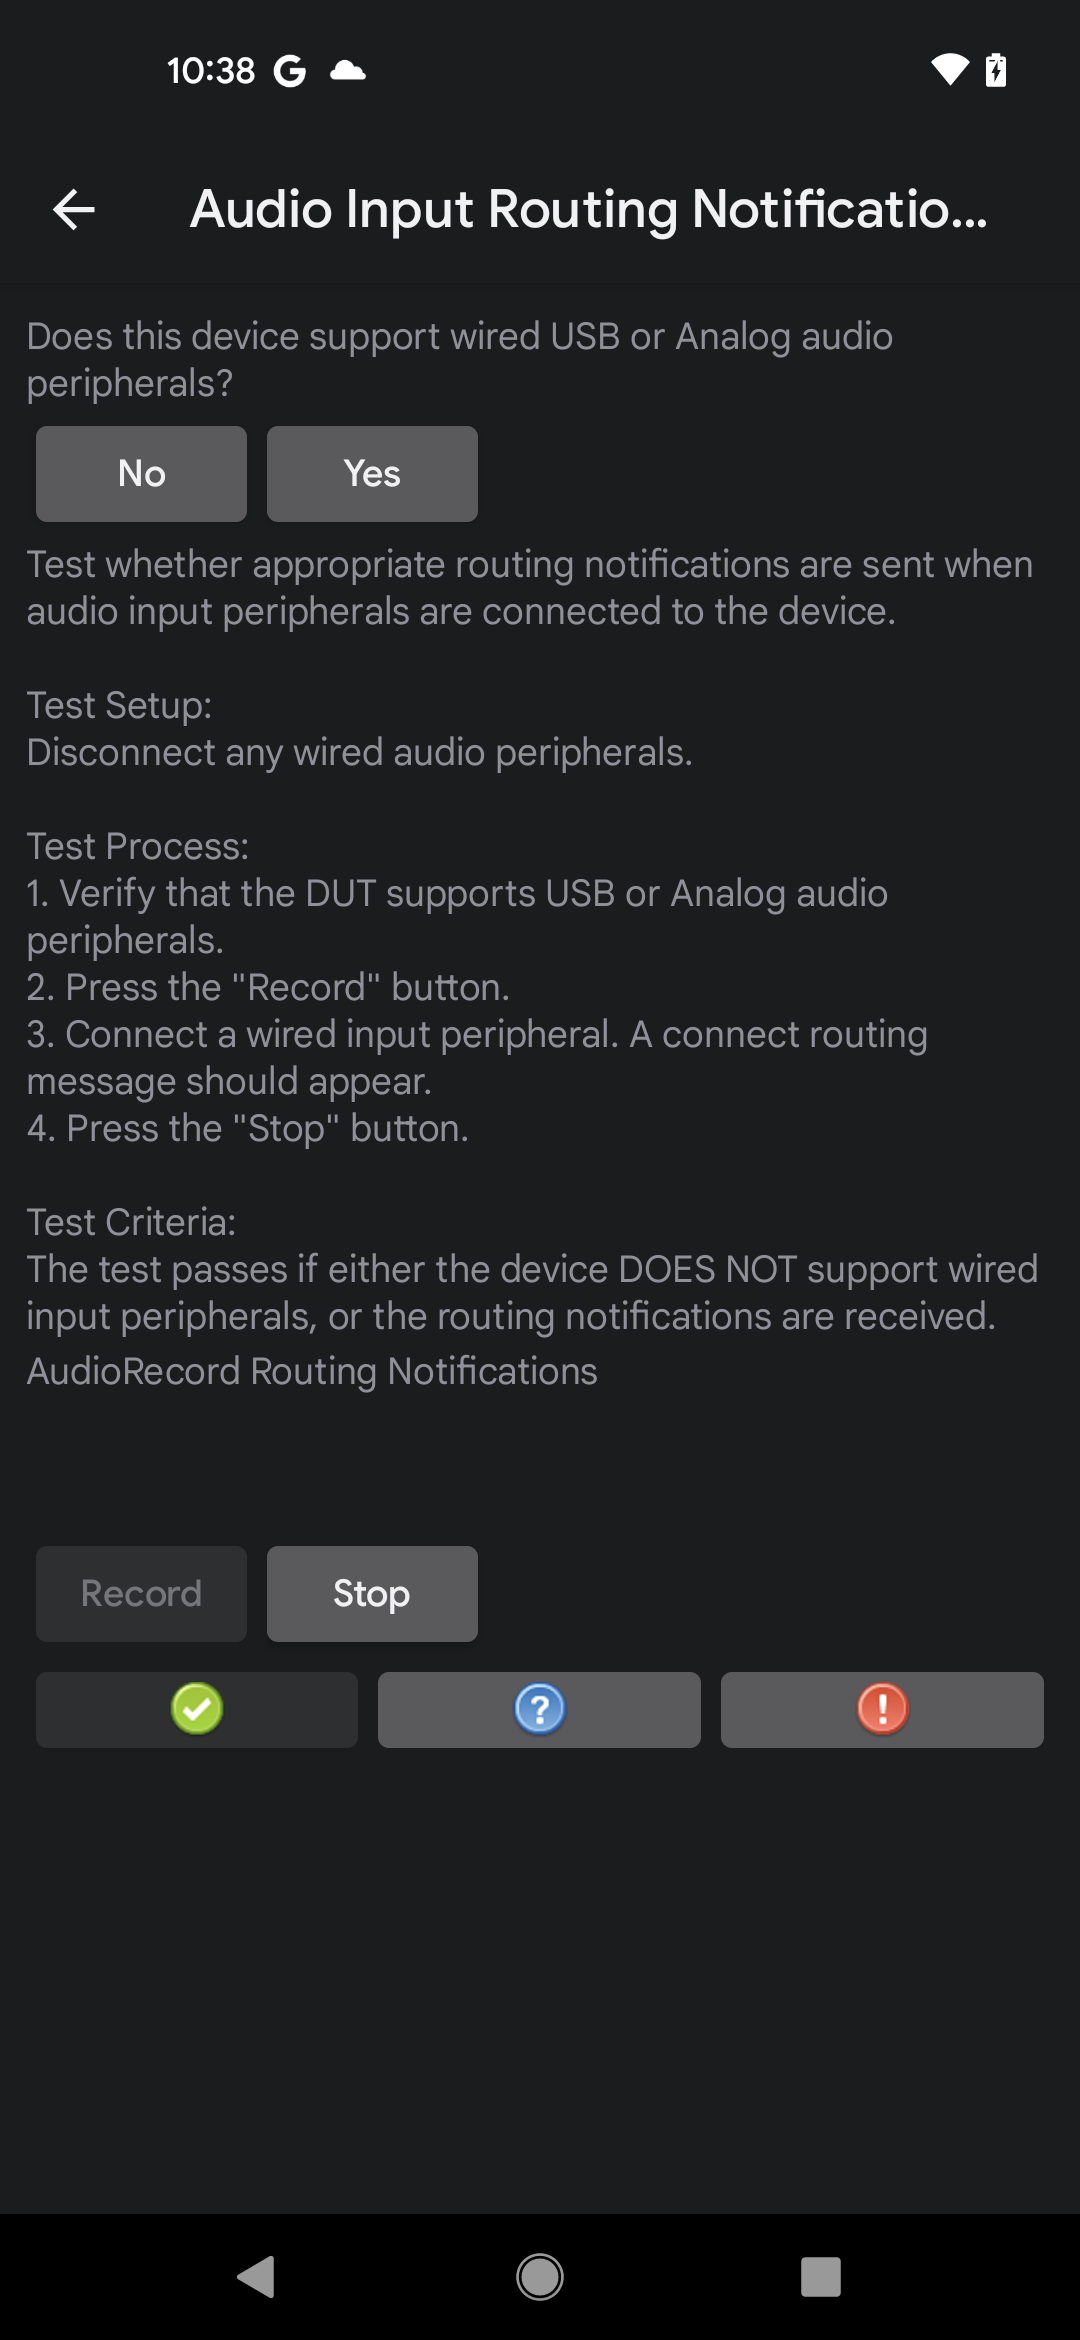 Audio Input Routing Notifications test